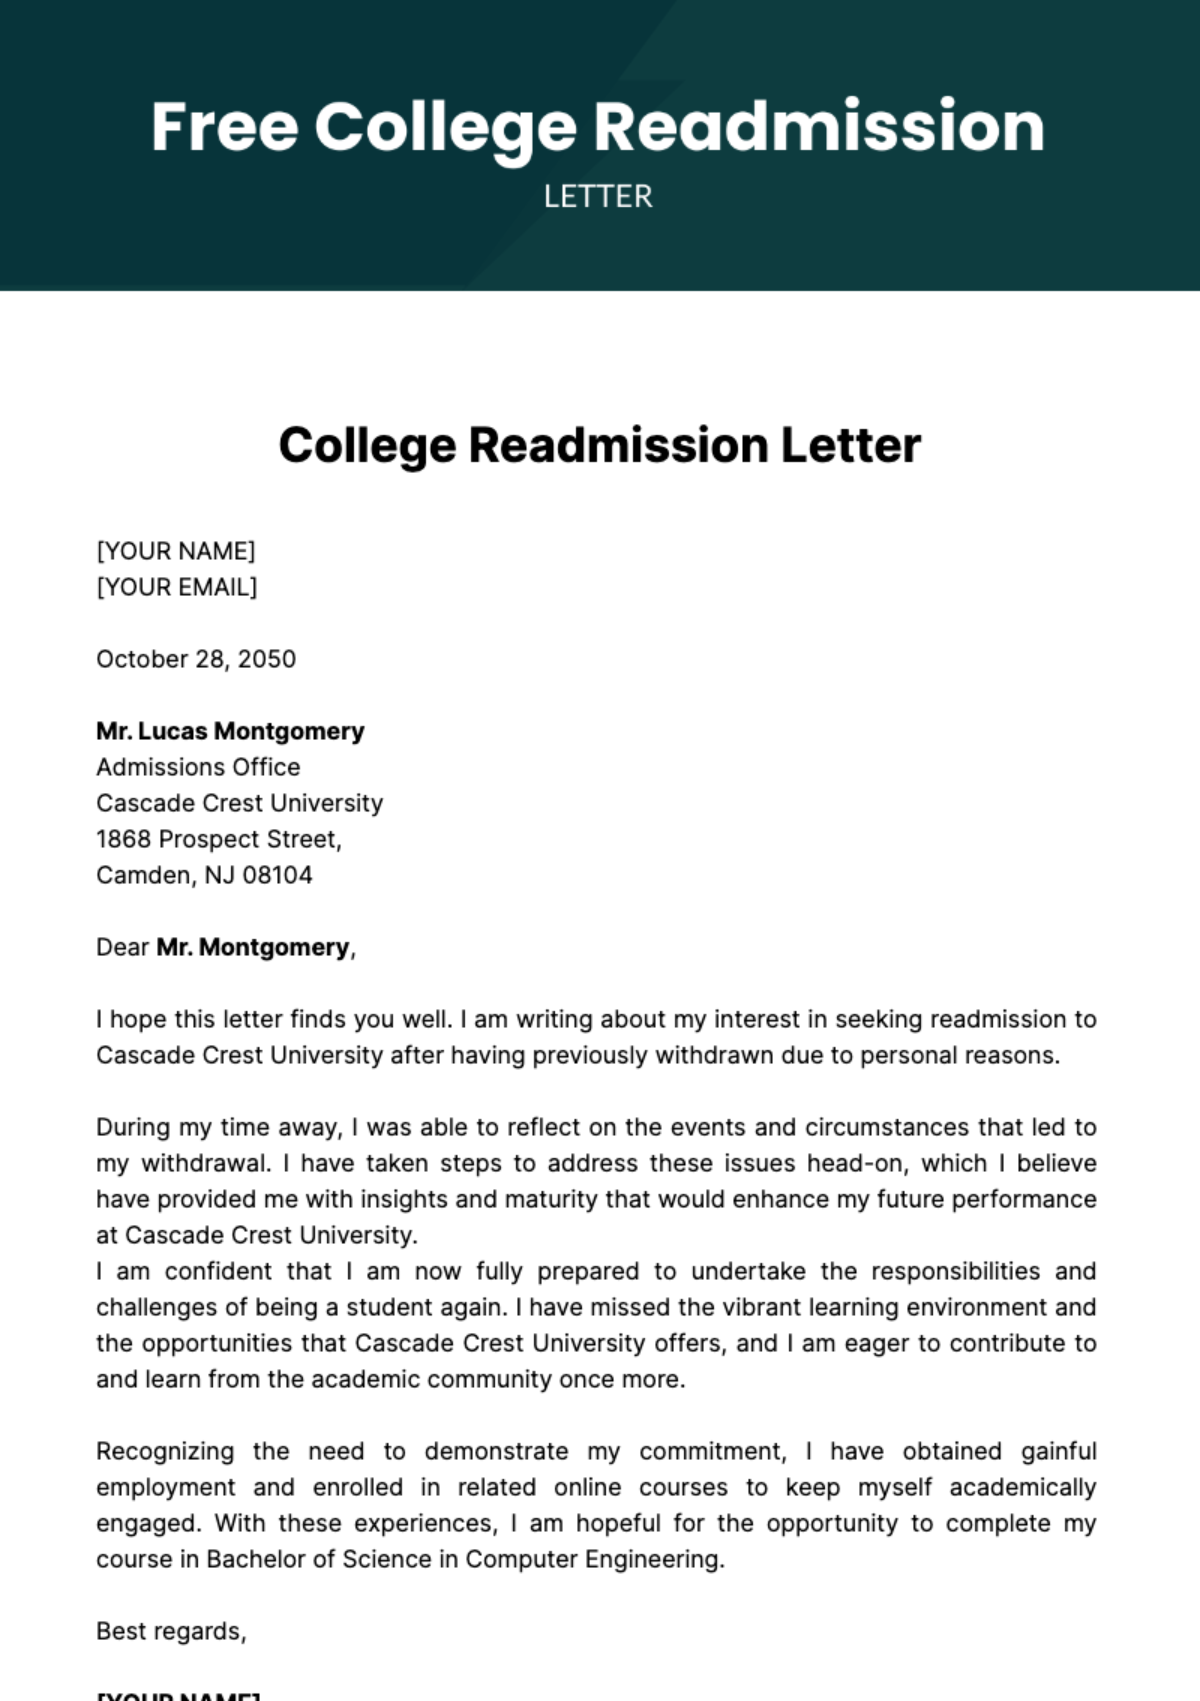 Free College Readmission Letter Template